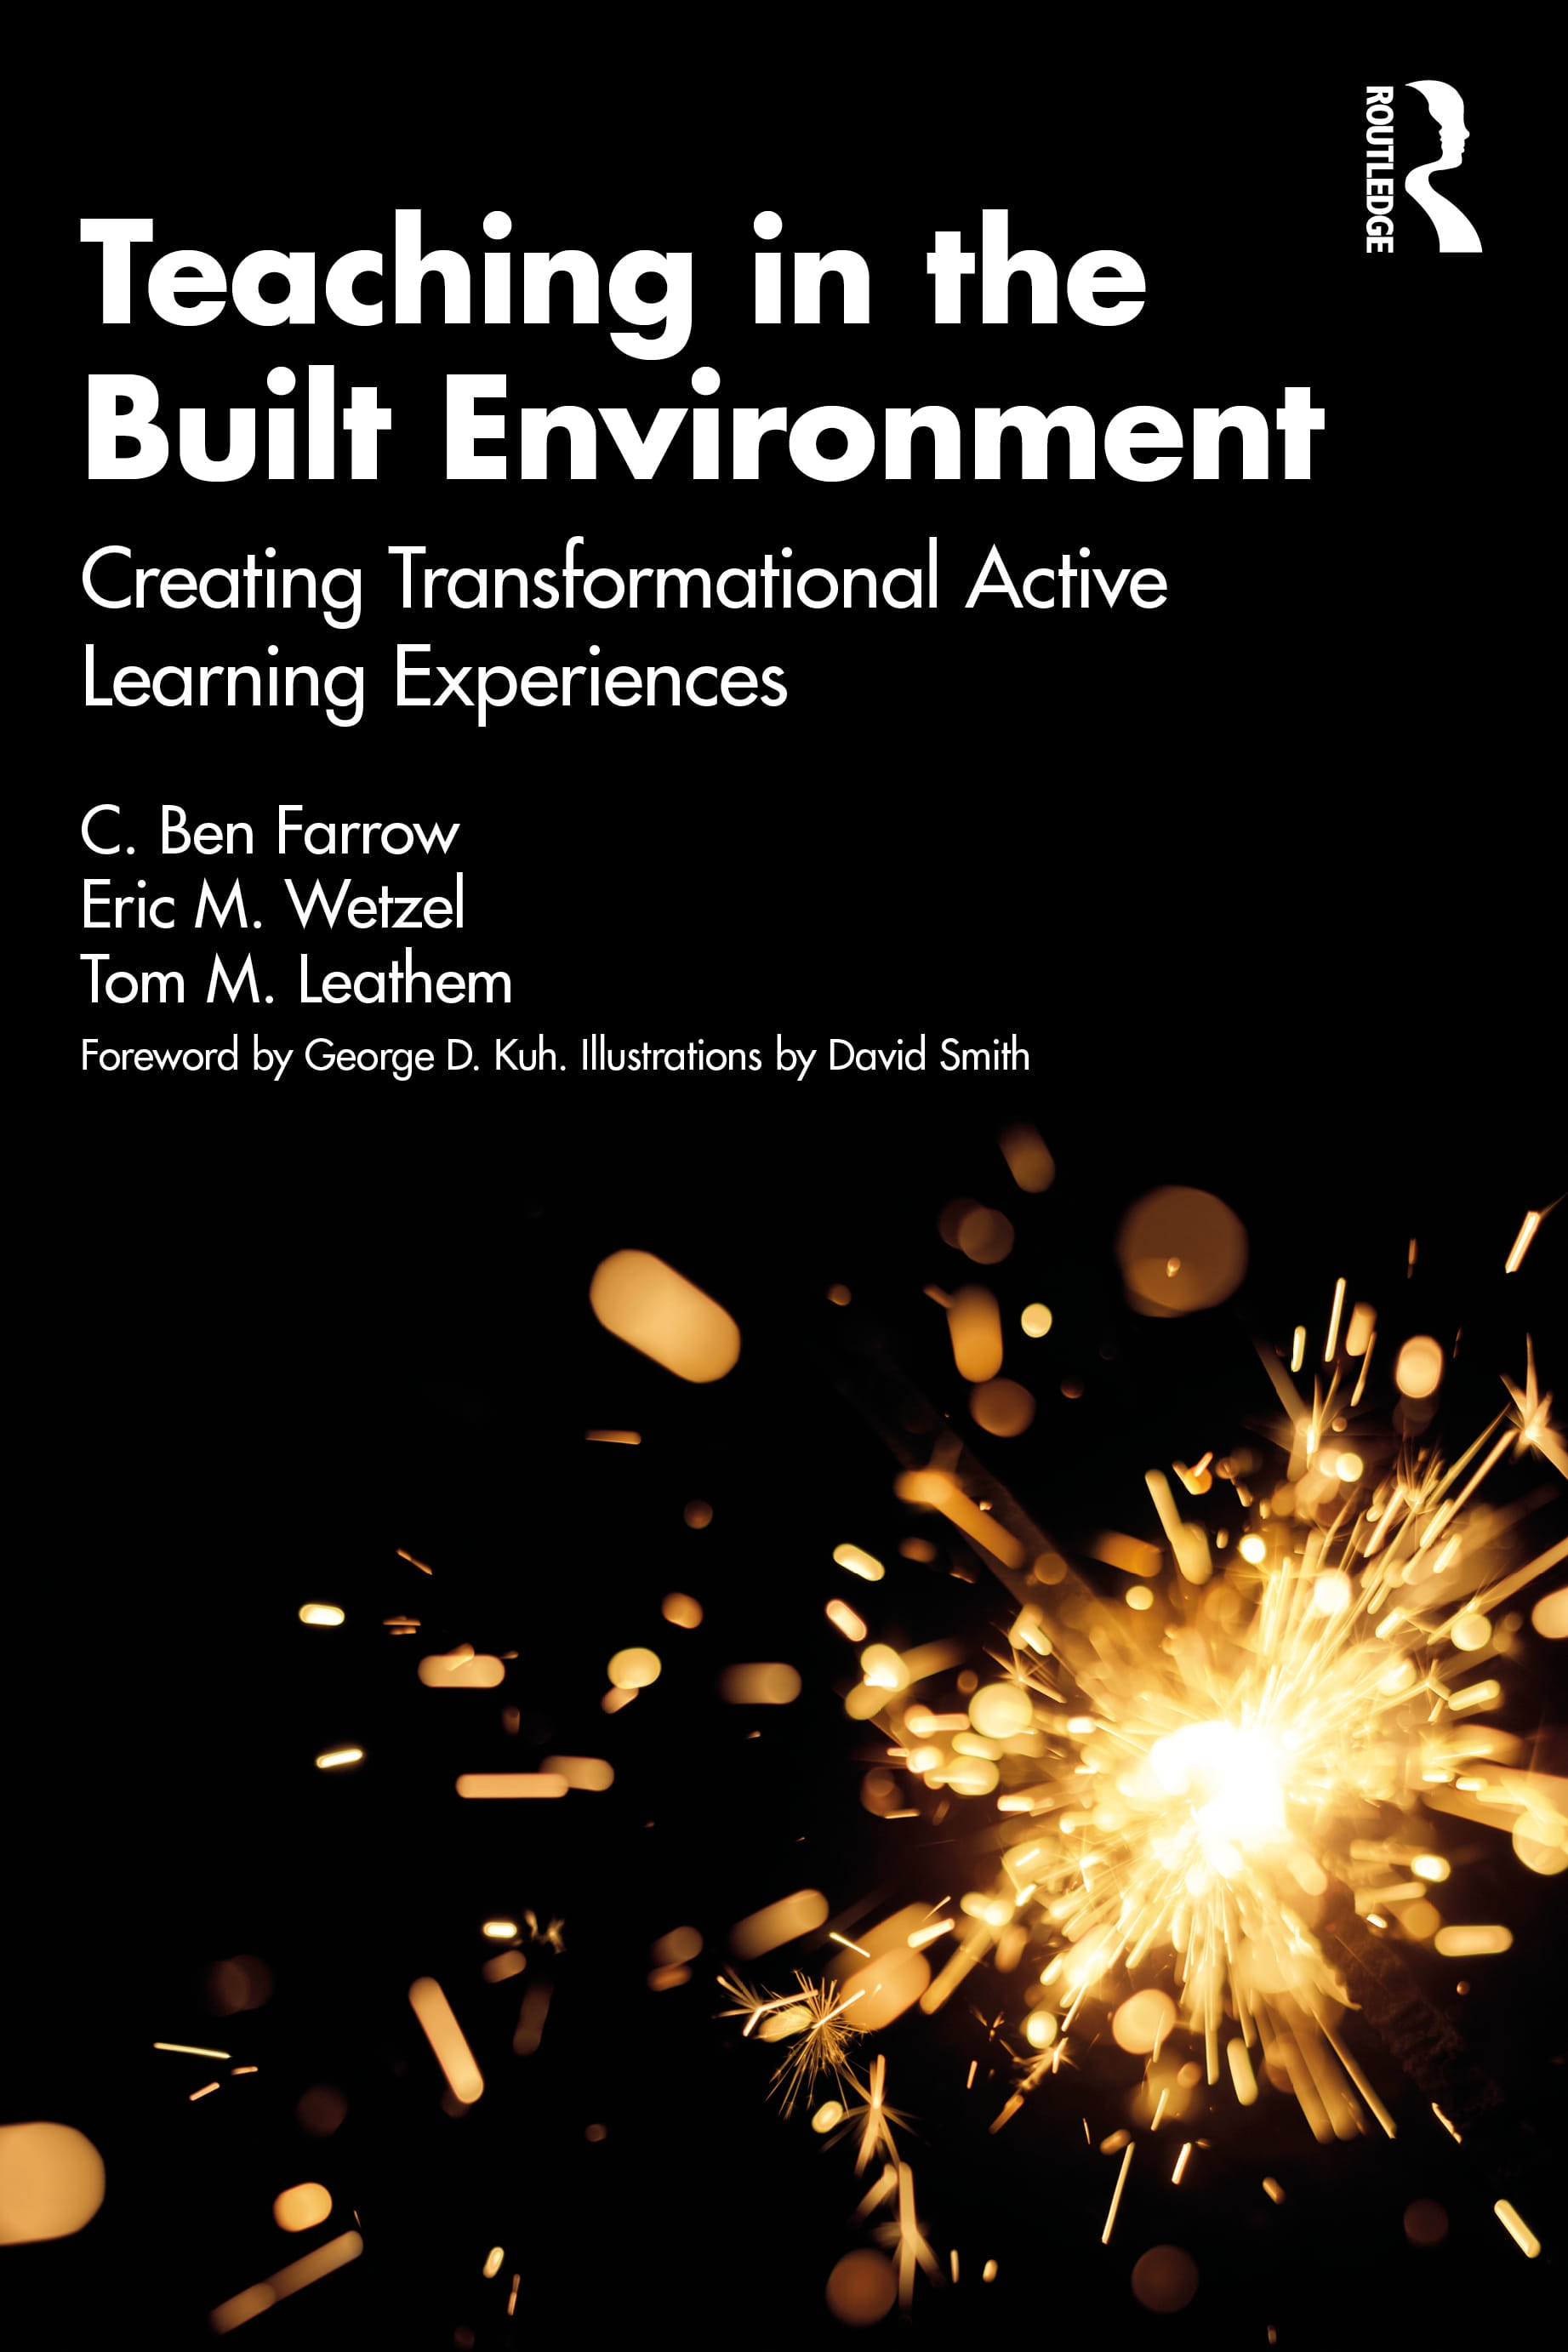 Teaching in the Built Environment: Creating Transformational Active Learning Experiences